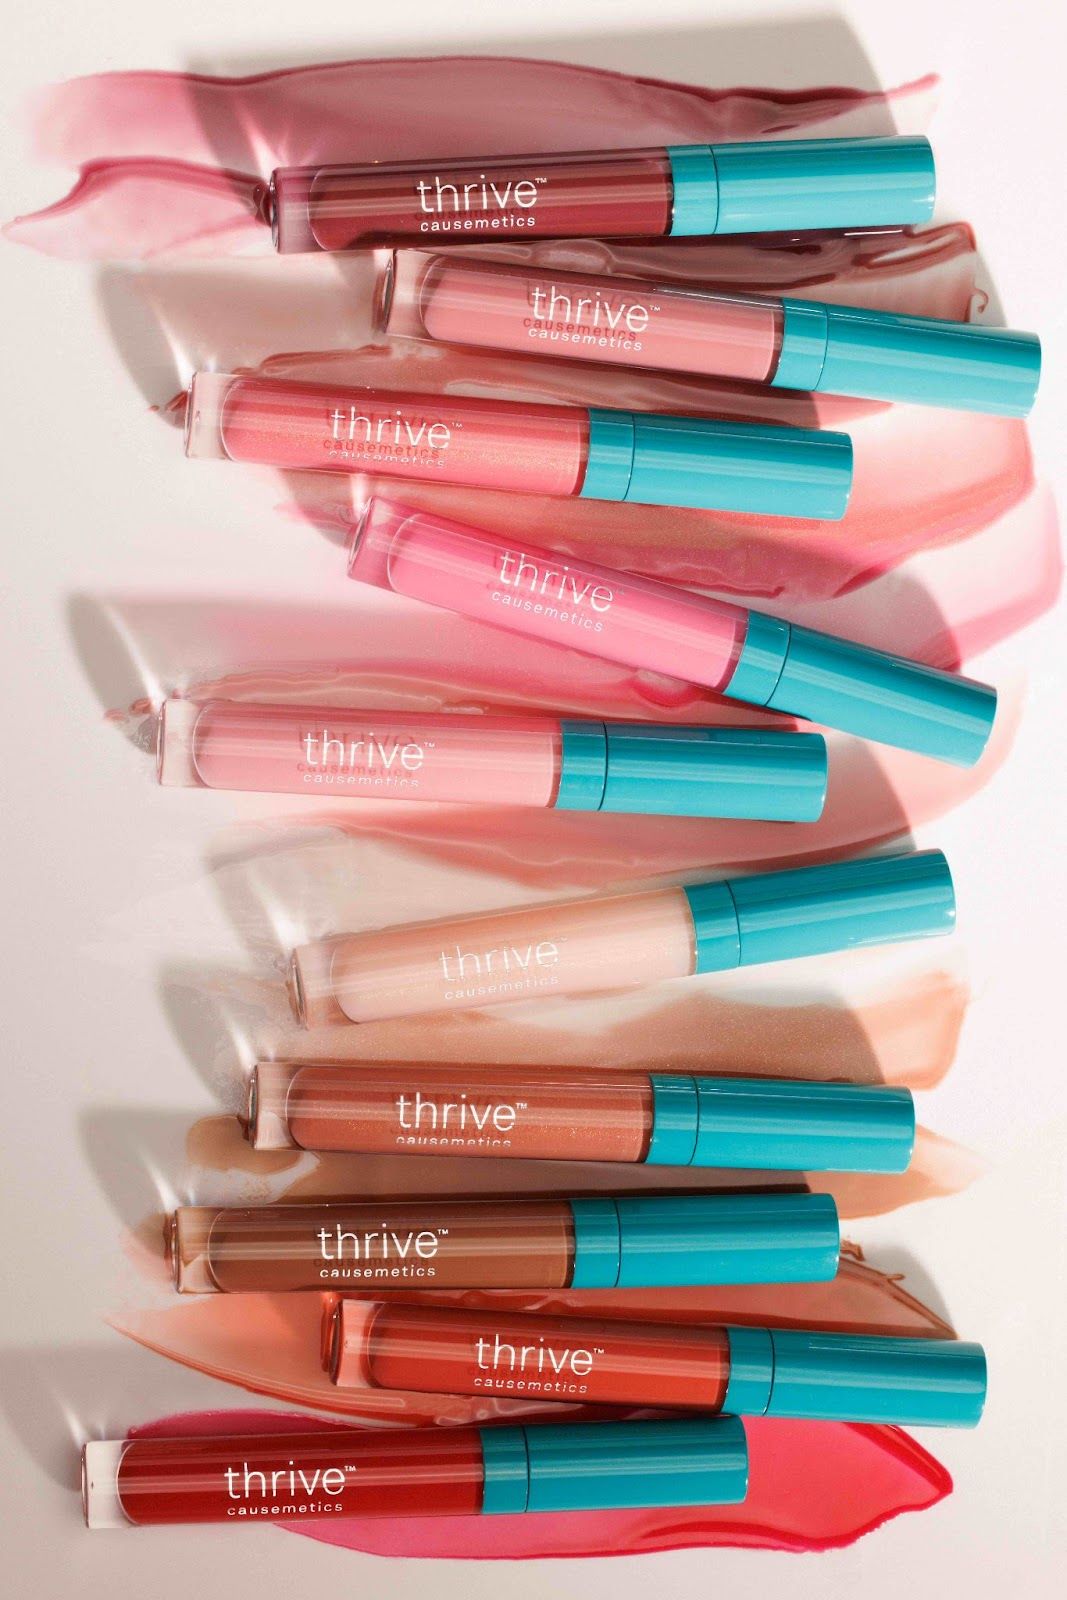 An image of the 10 Thrive Causemetics Sheer Strength Lip-Plumping Peptide Glosses.